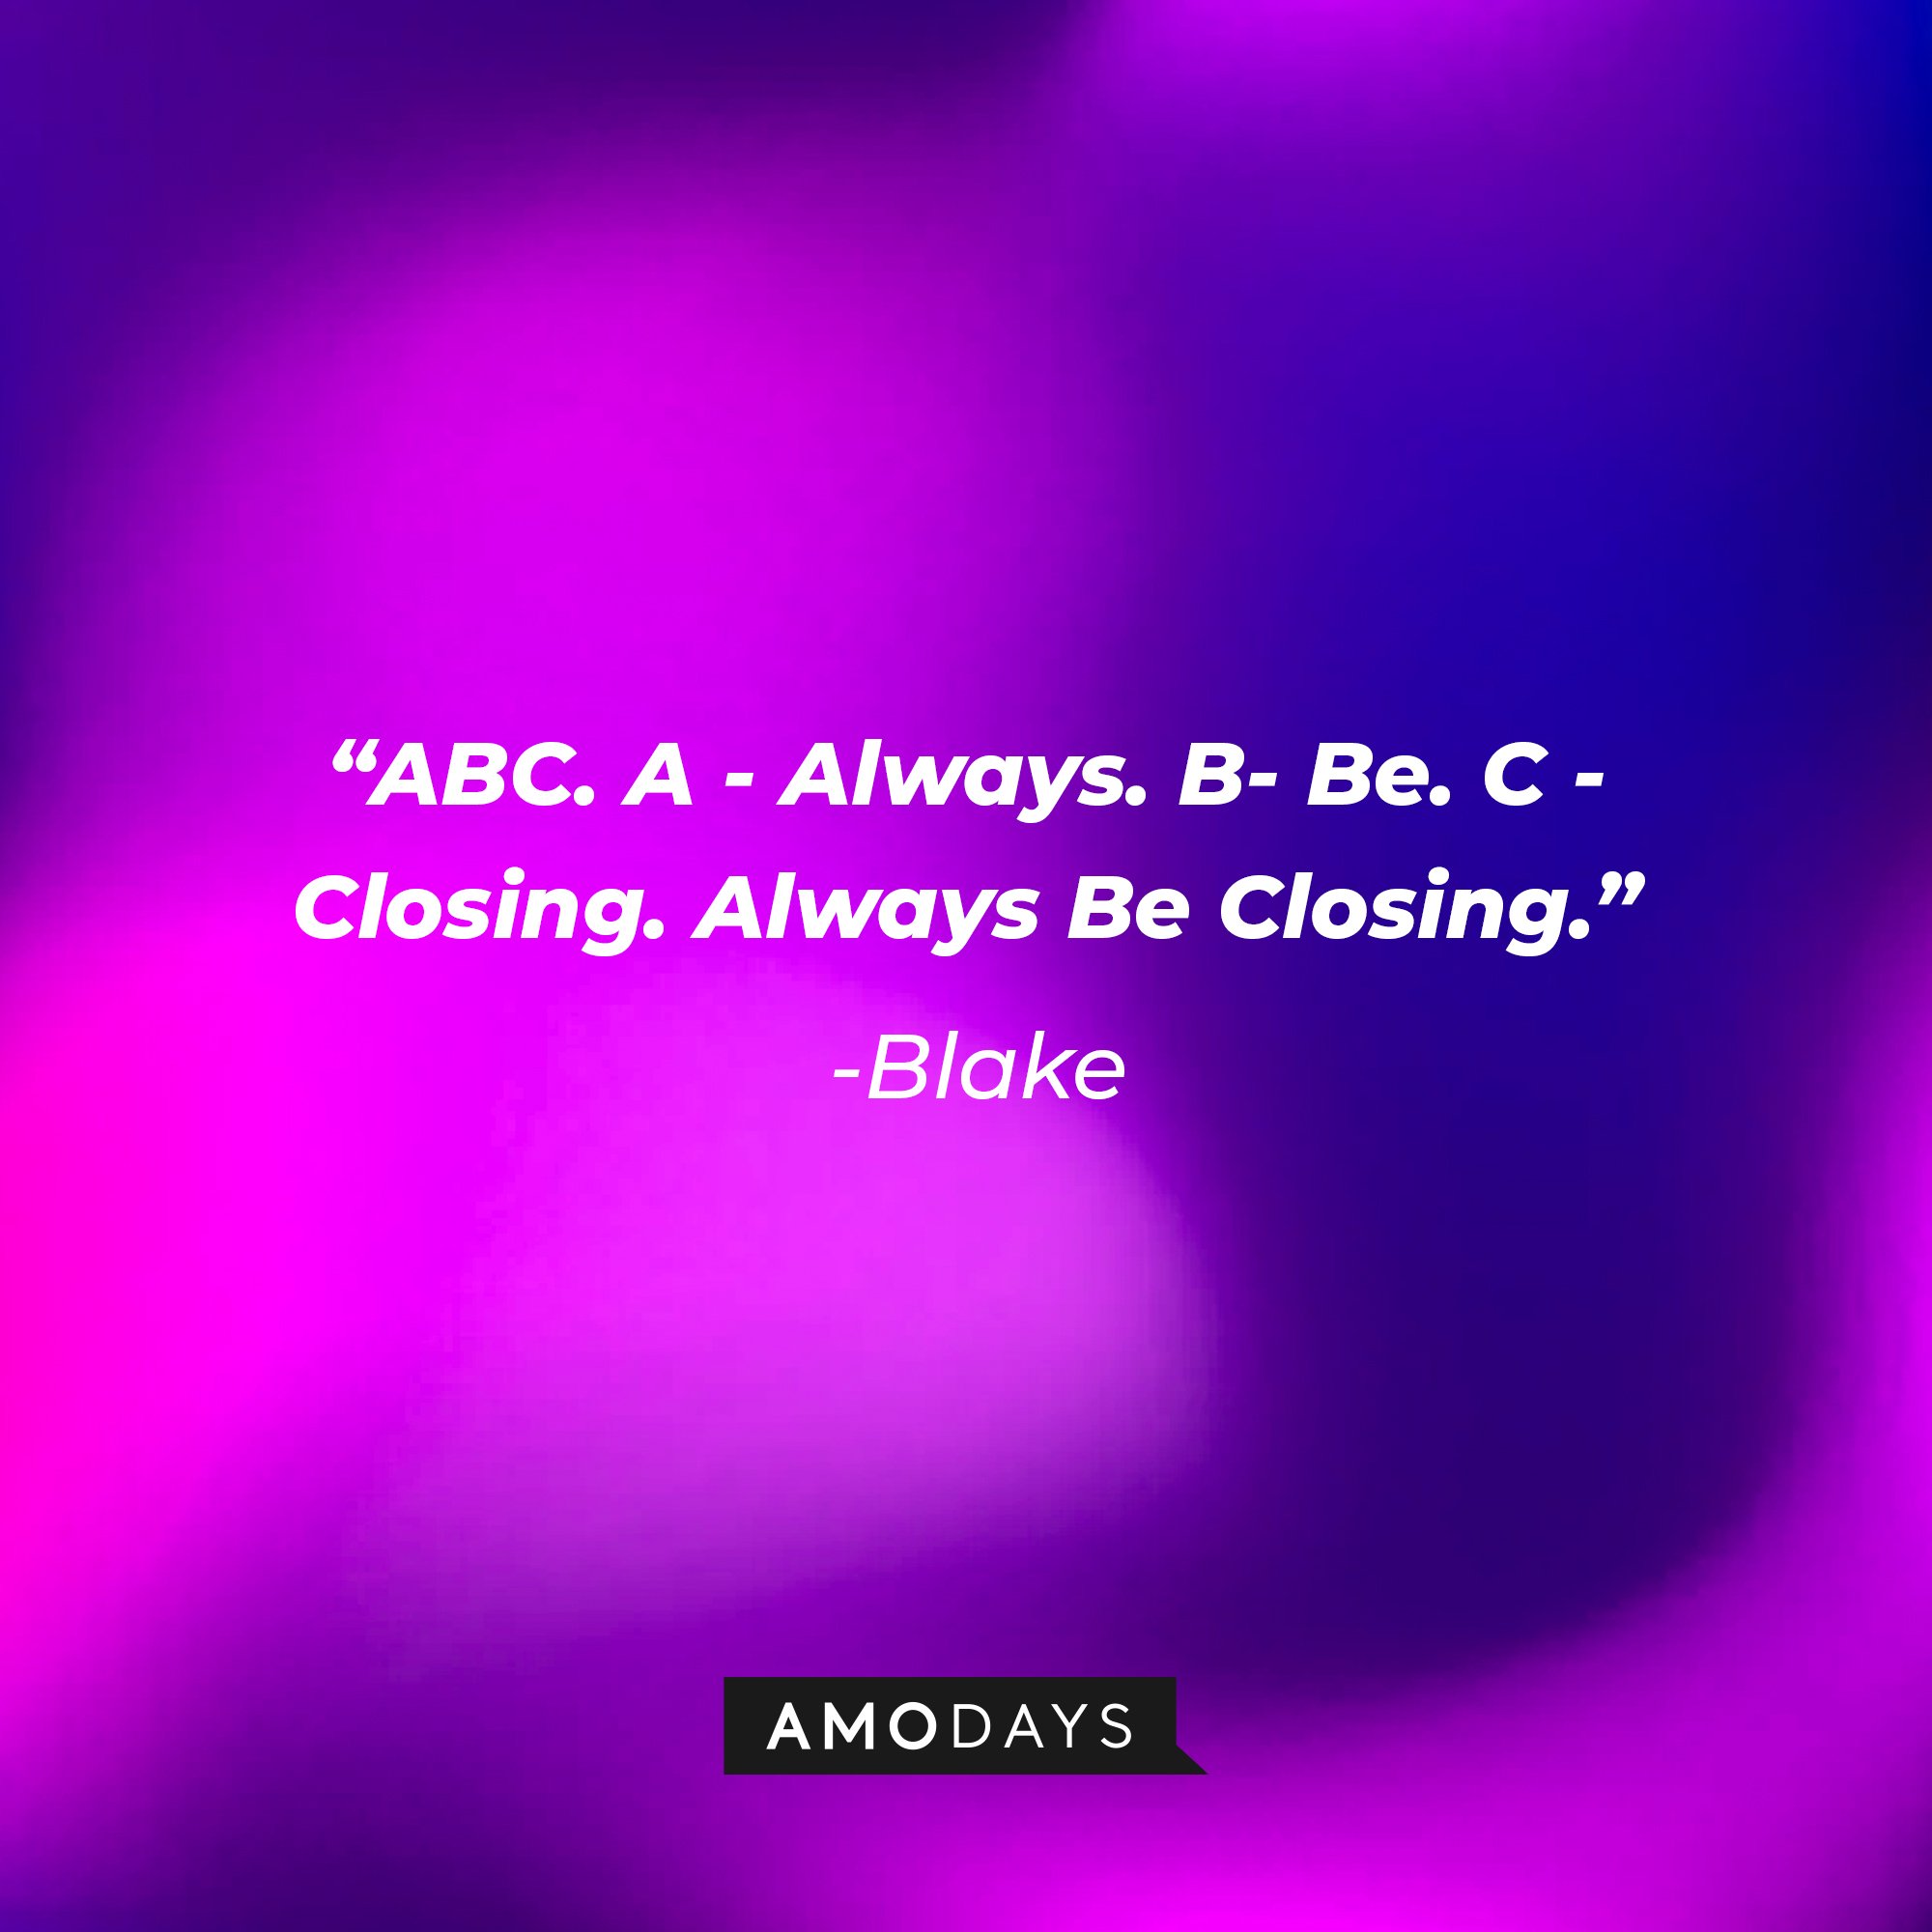 Blake's quote: "ABC. A - Always. B- Be. C - Closing. Always Be Closing." | Image: AmoDays